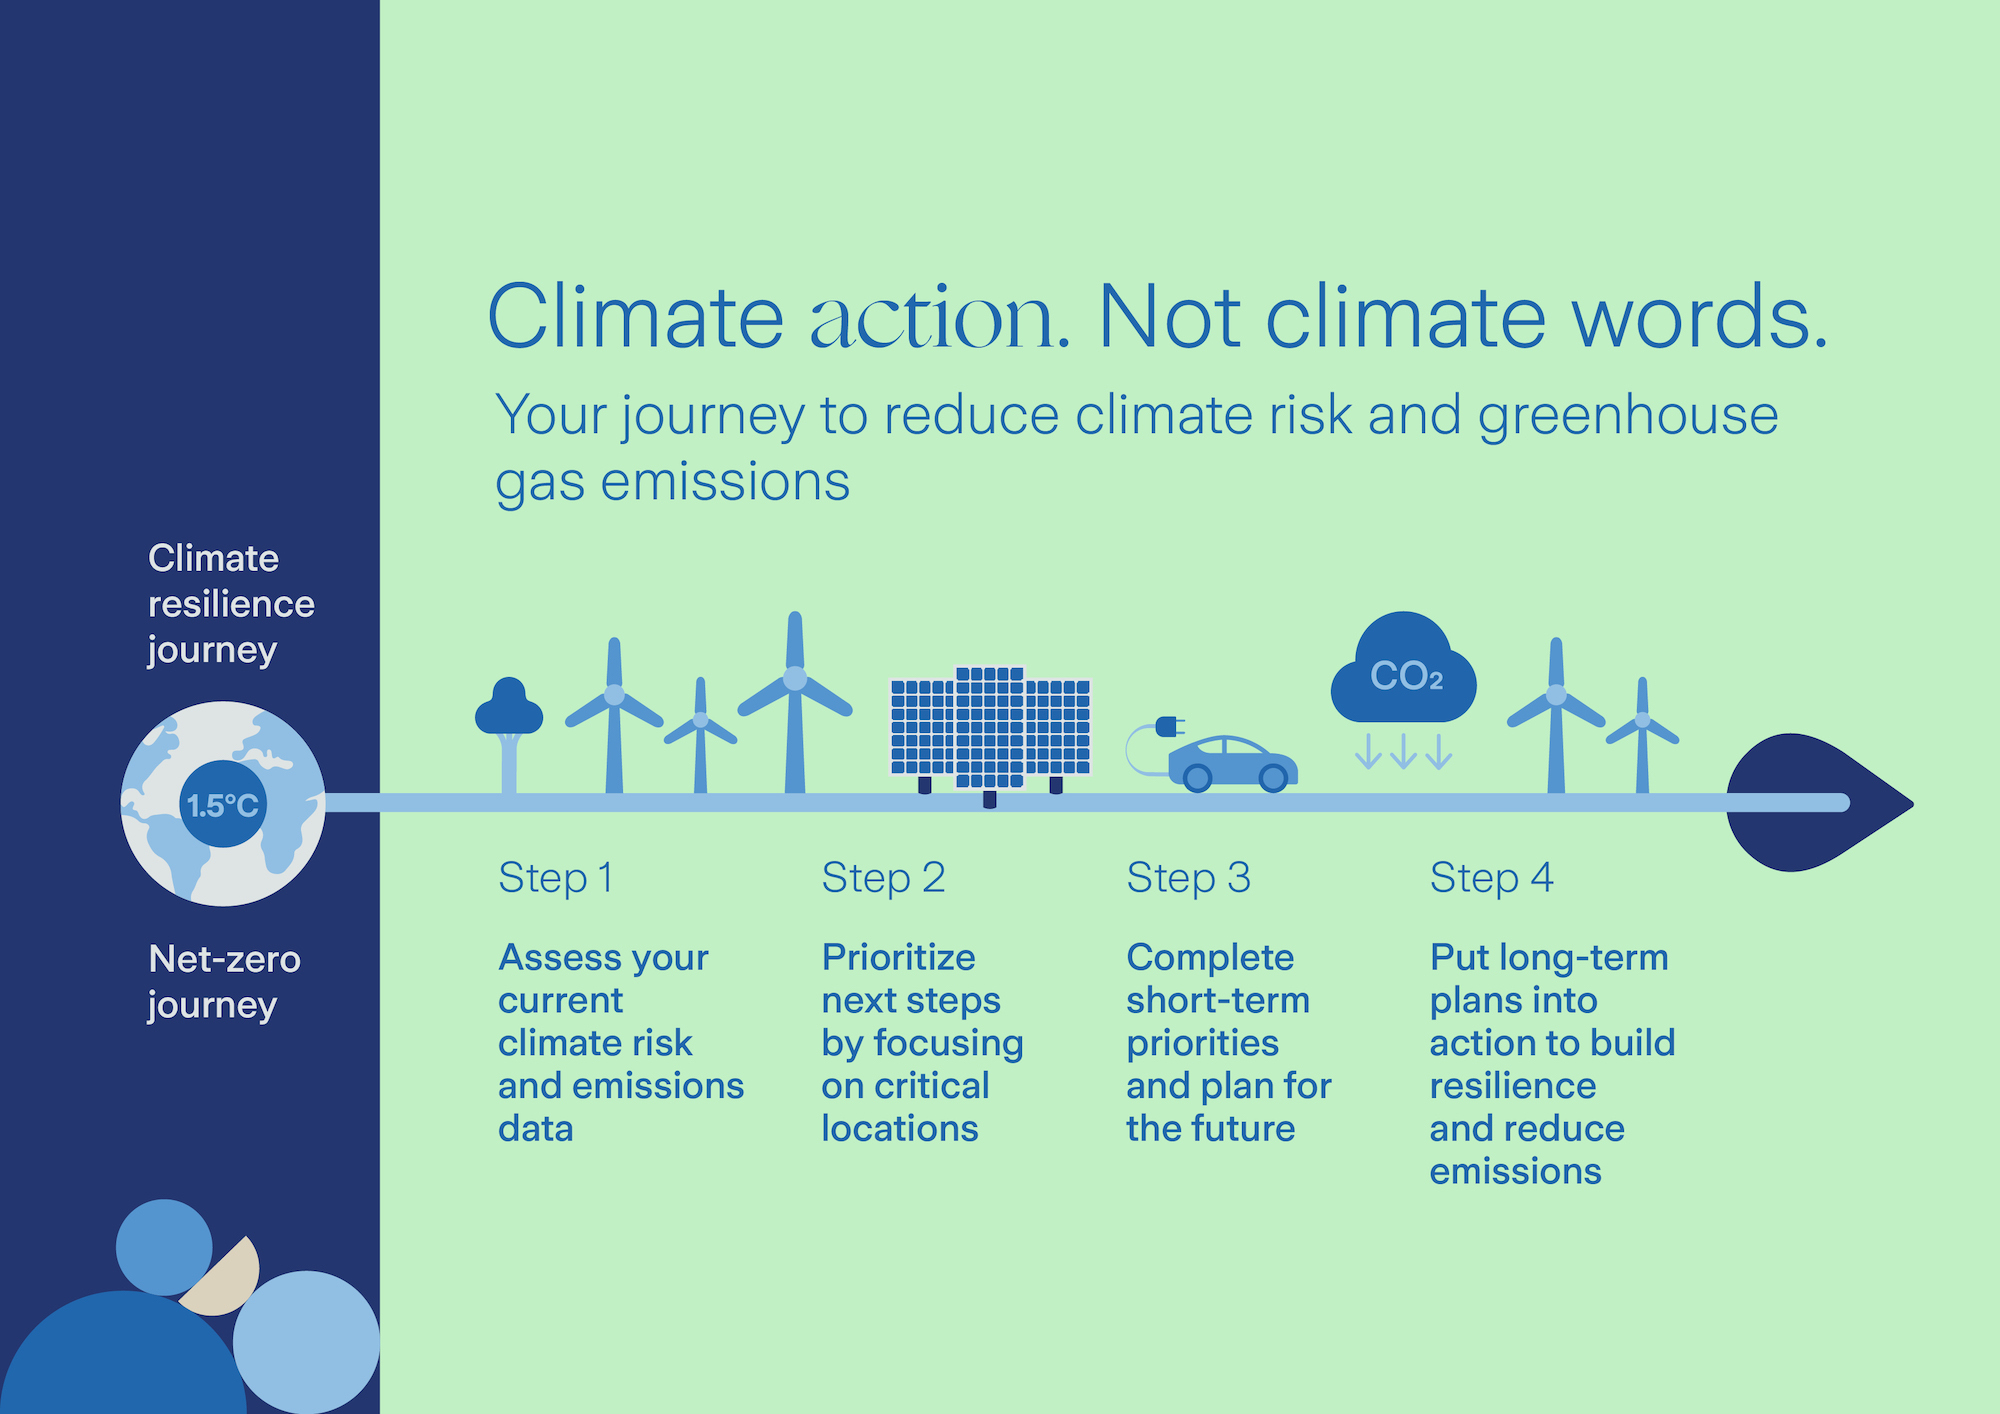 Image: Climate Action not Climate Words - Your Climate Journey with South Pole and Zurich Resilience Solutions. 